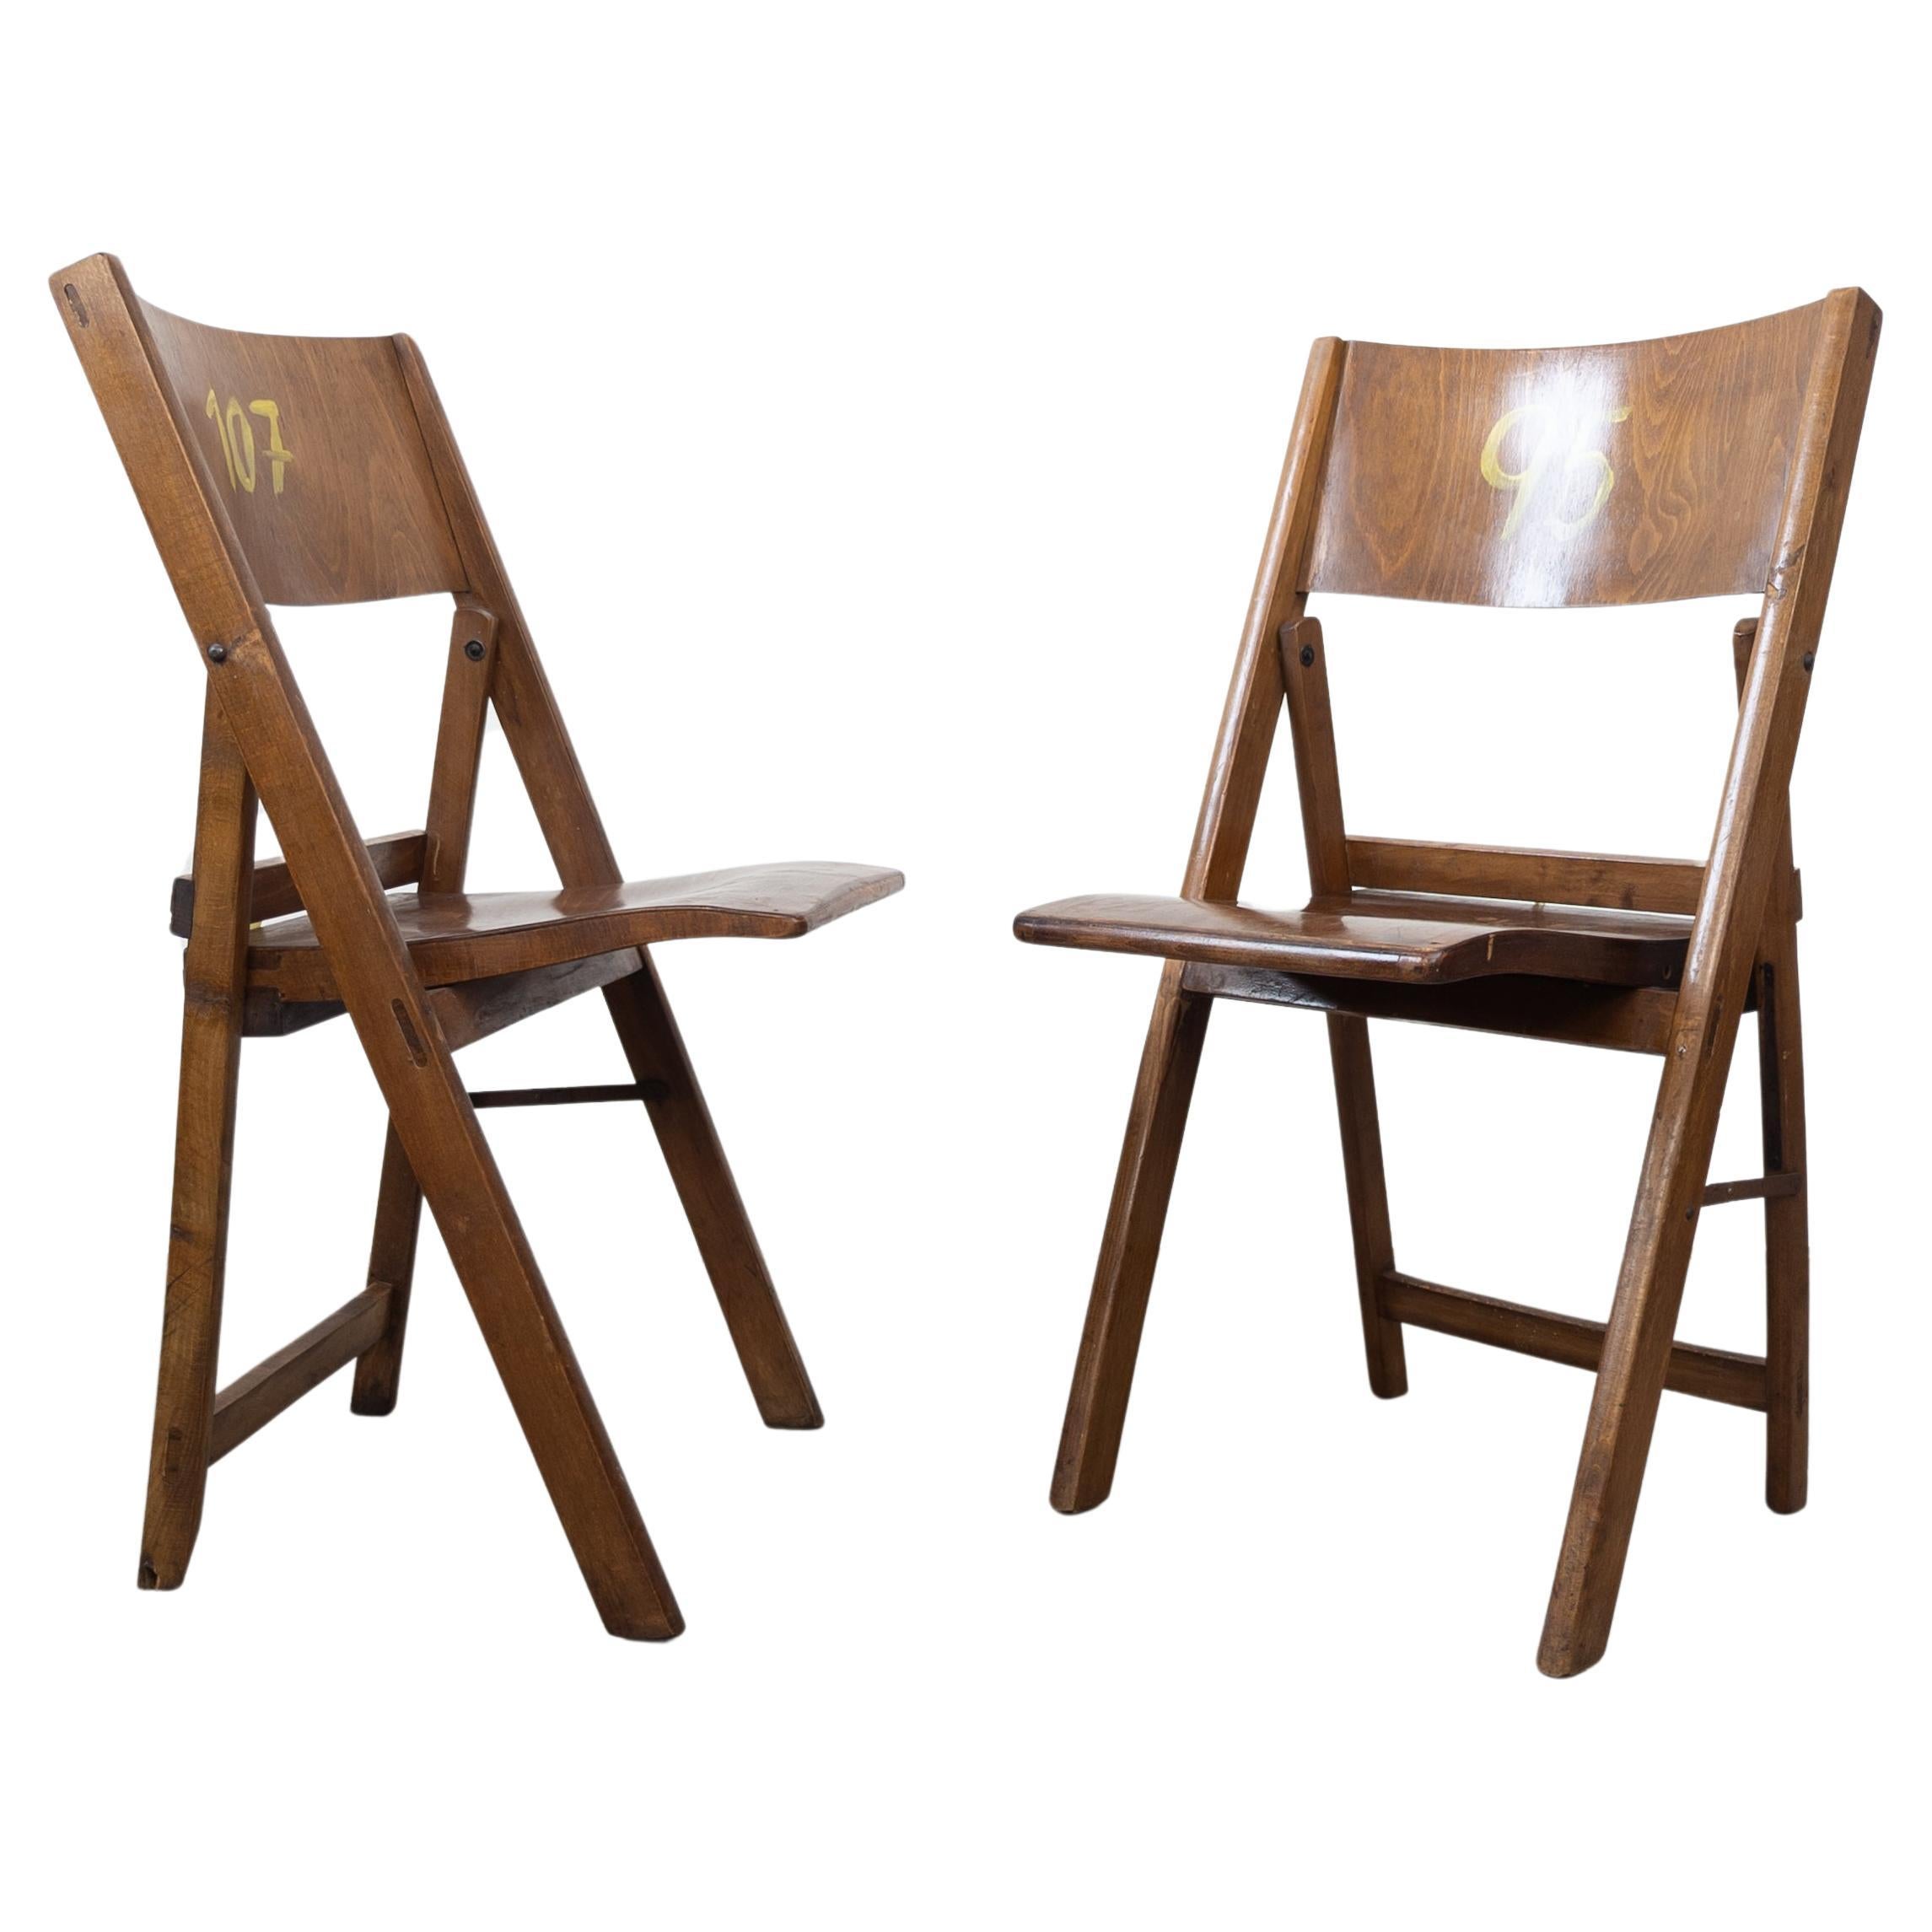 Pair of vintage Thonet folding chairs 1930s